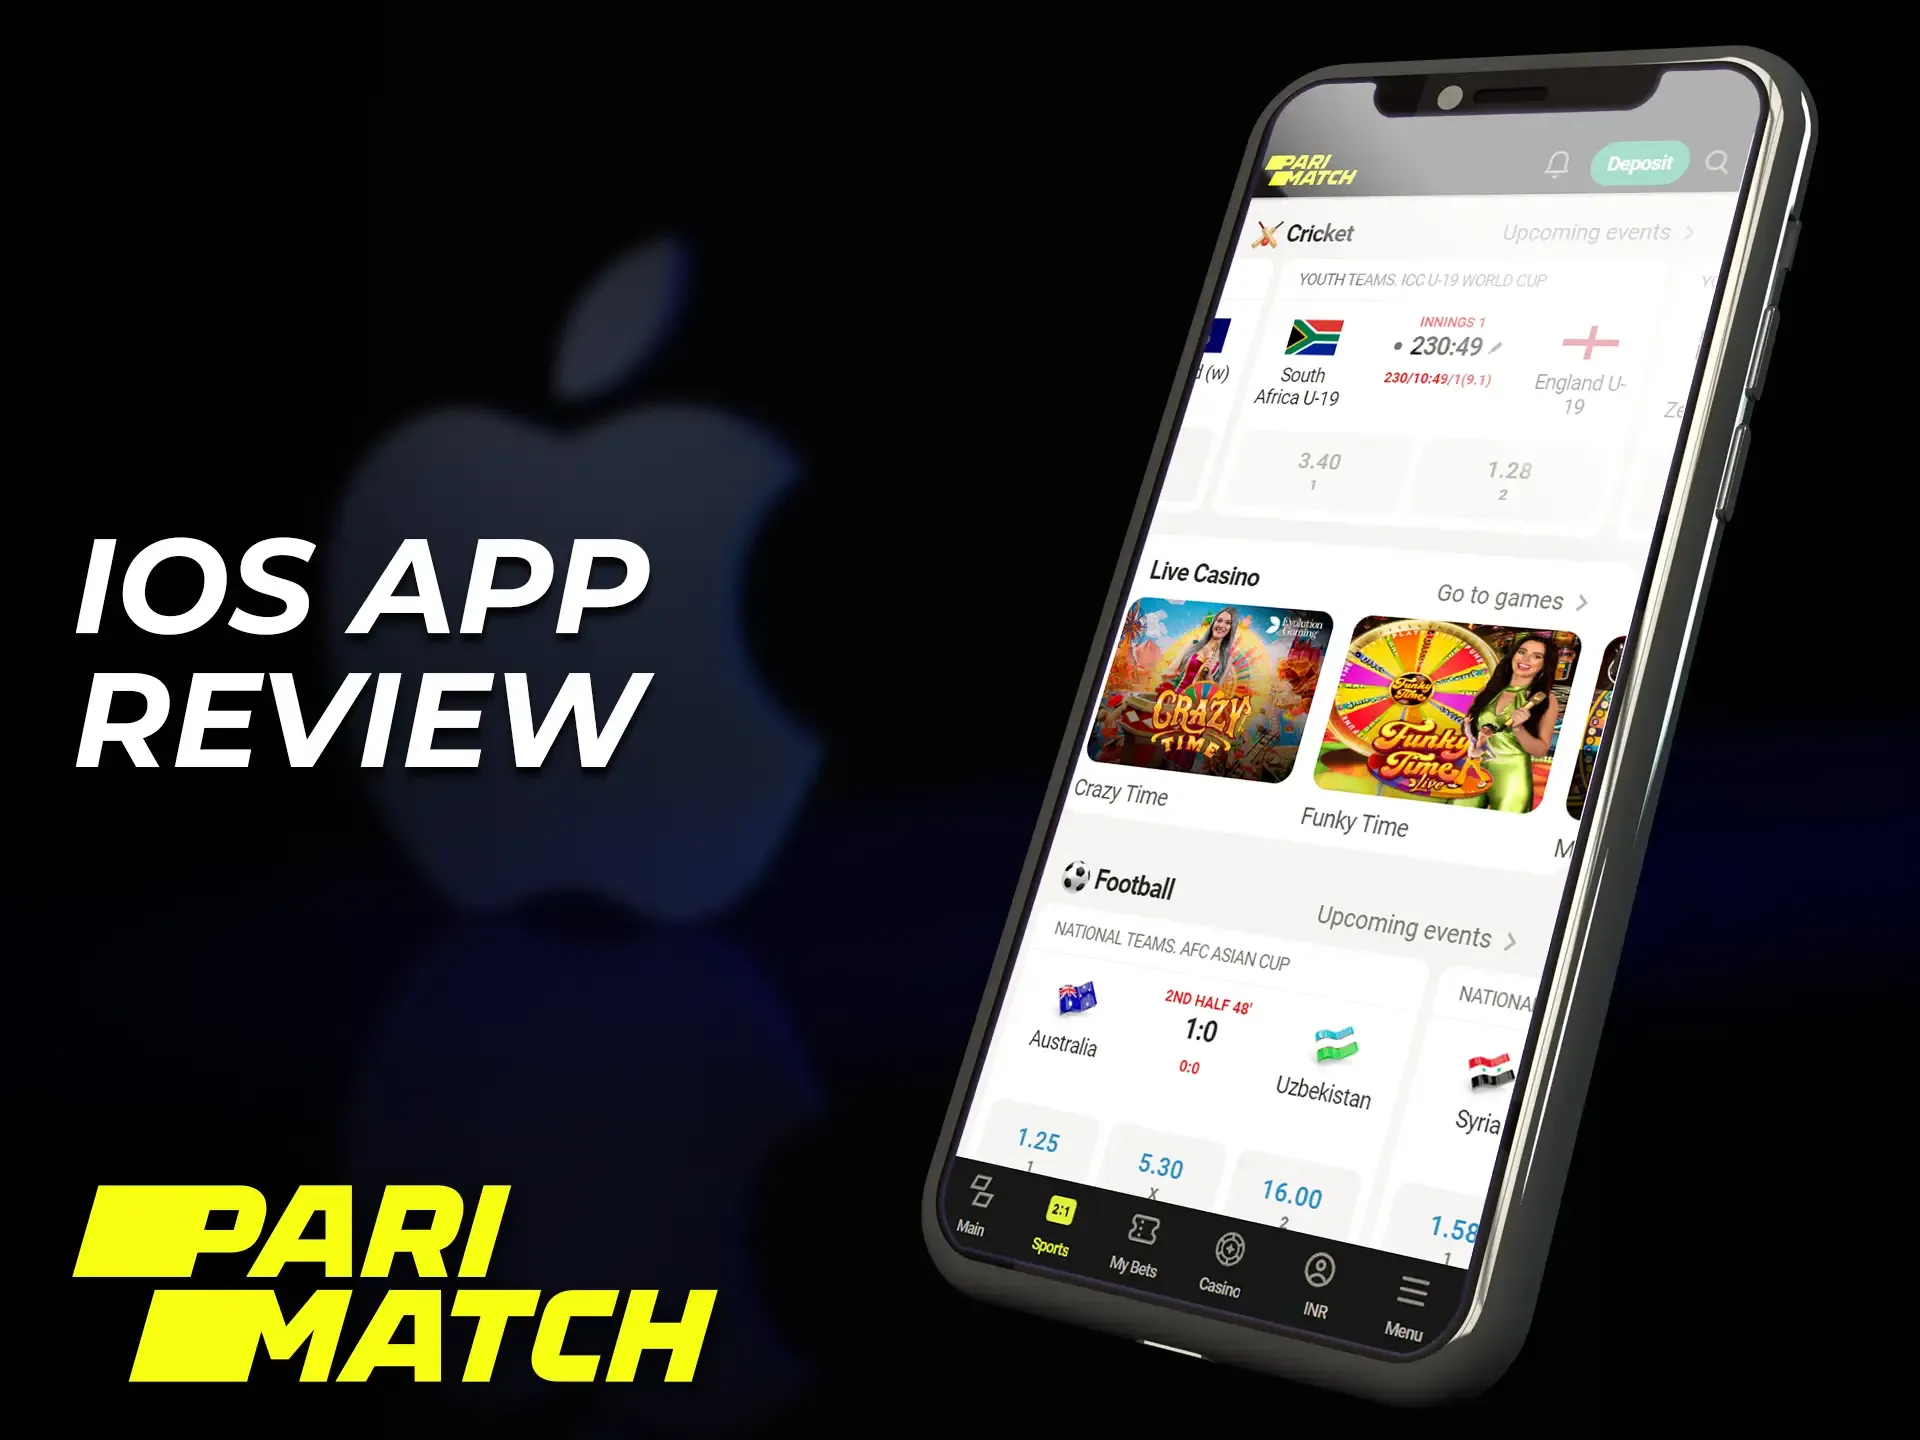 The Parimatch app is well optimized for iOS users.